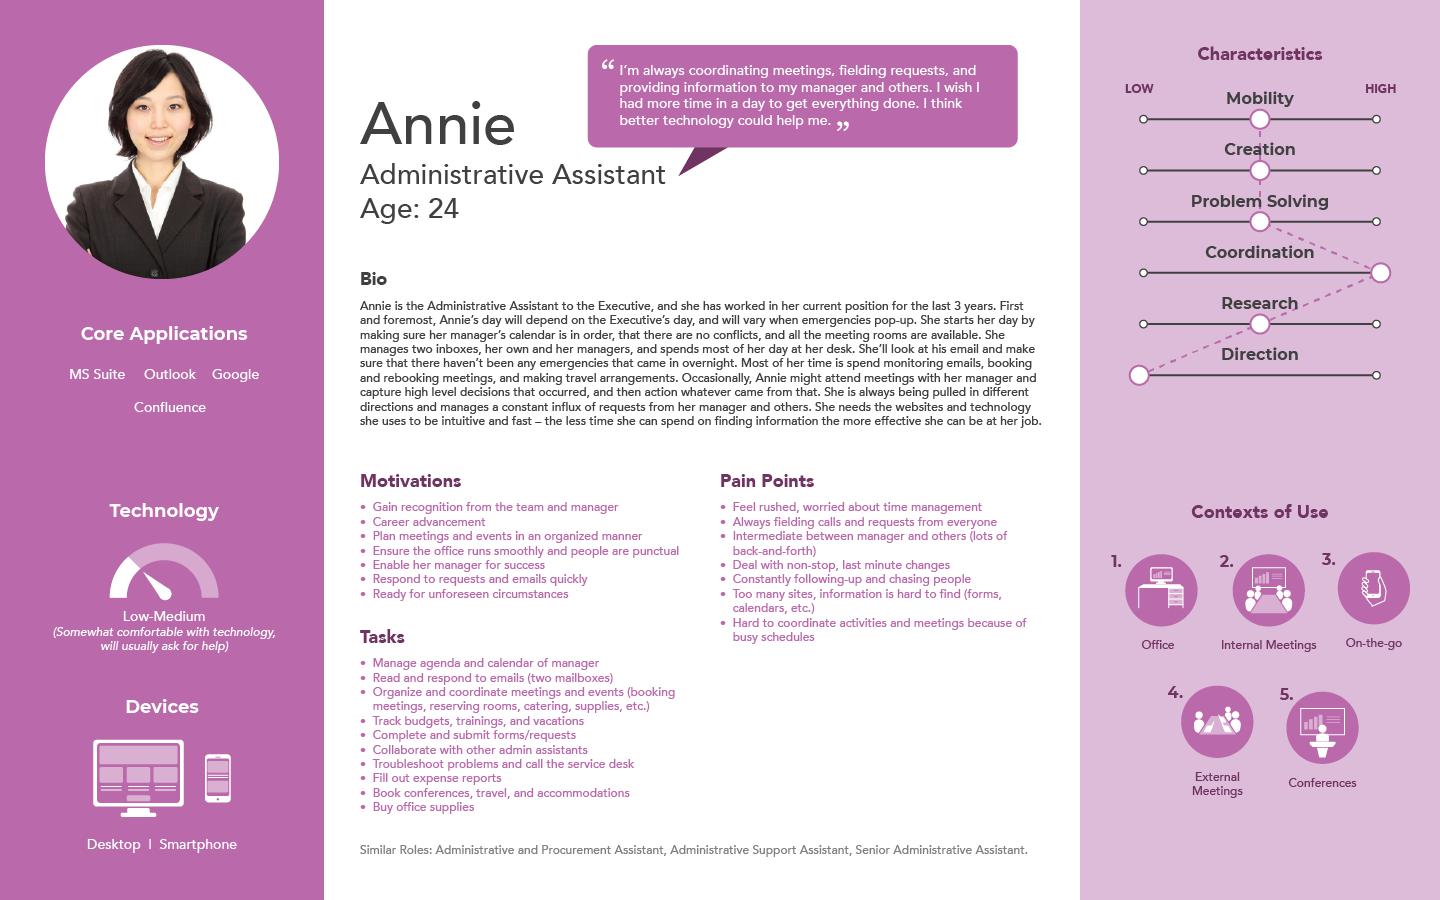 Sample of an administrative persona